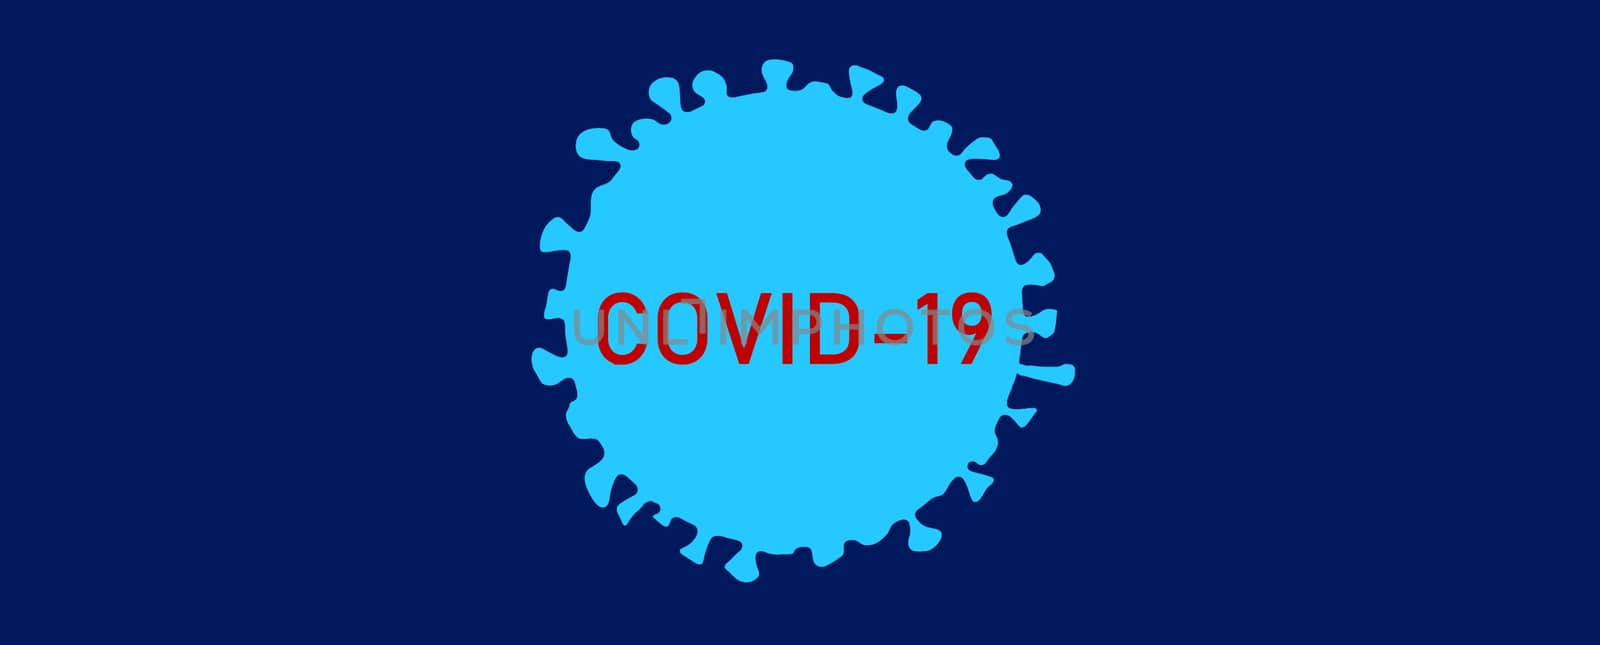 COVID-19 Coronavirus graphic design of corona virus drawing on blue medical background panoramic banner with text title by Maridav